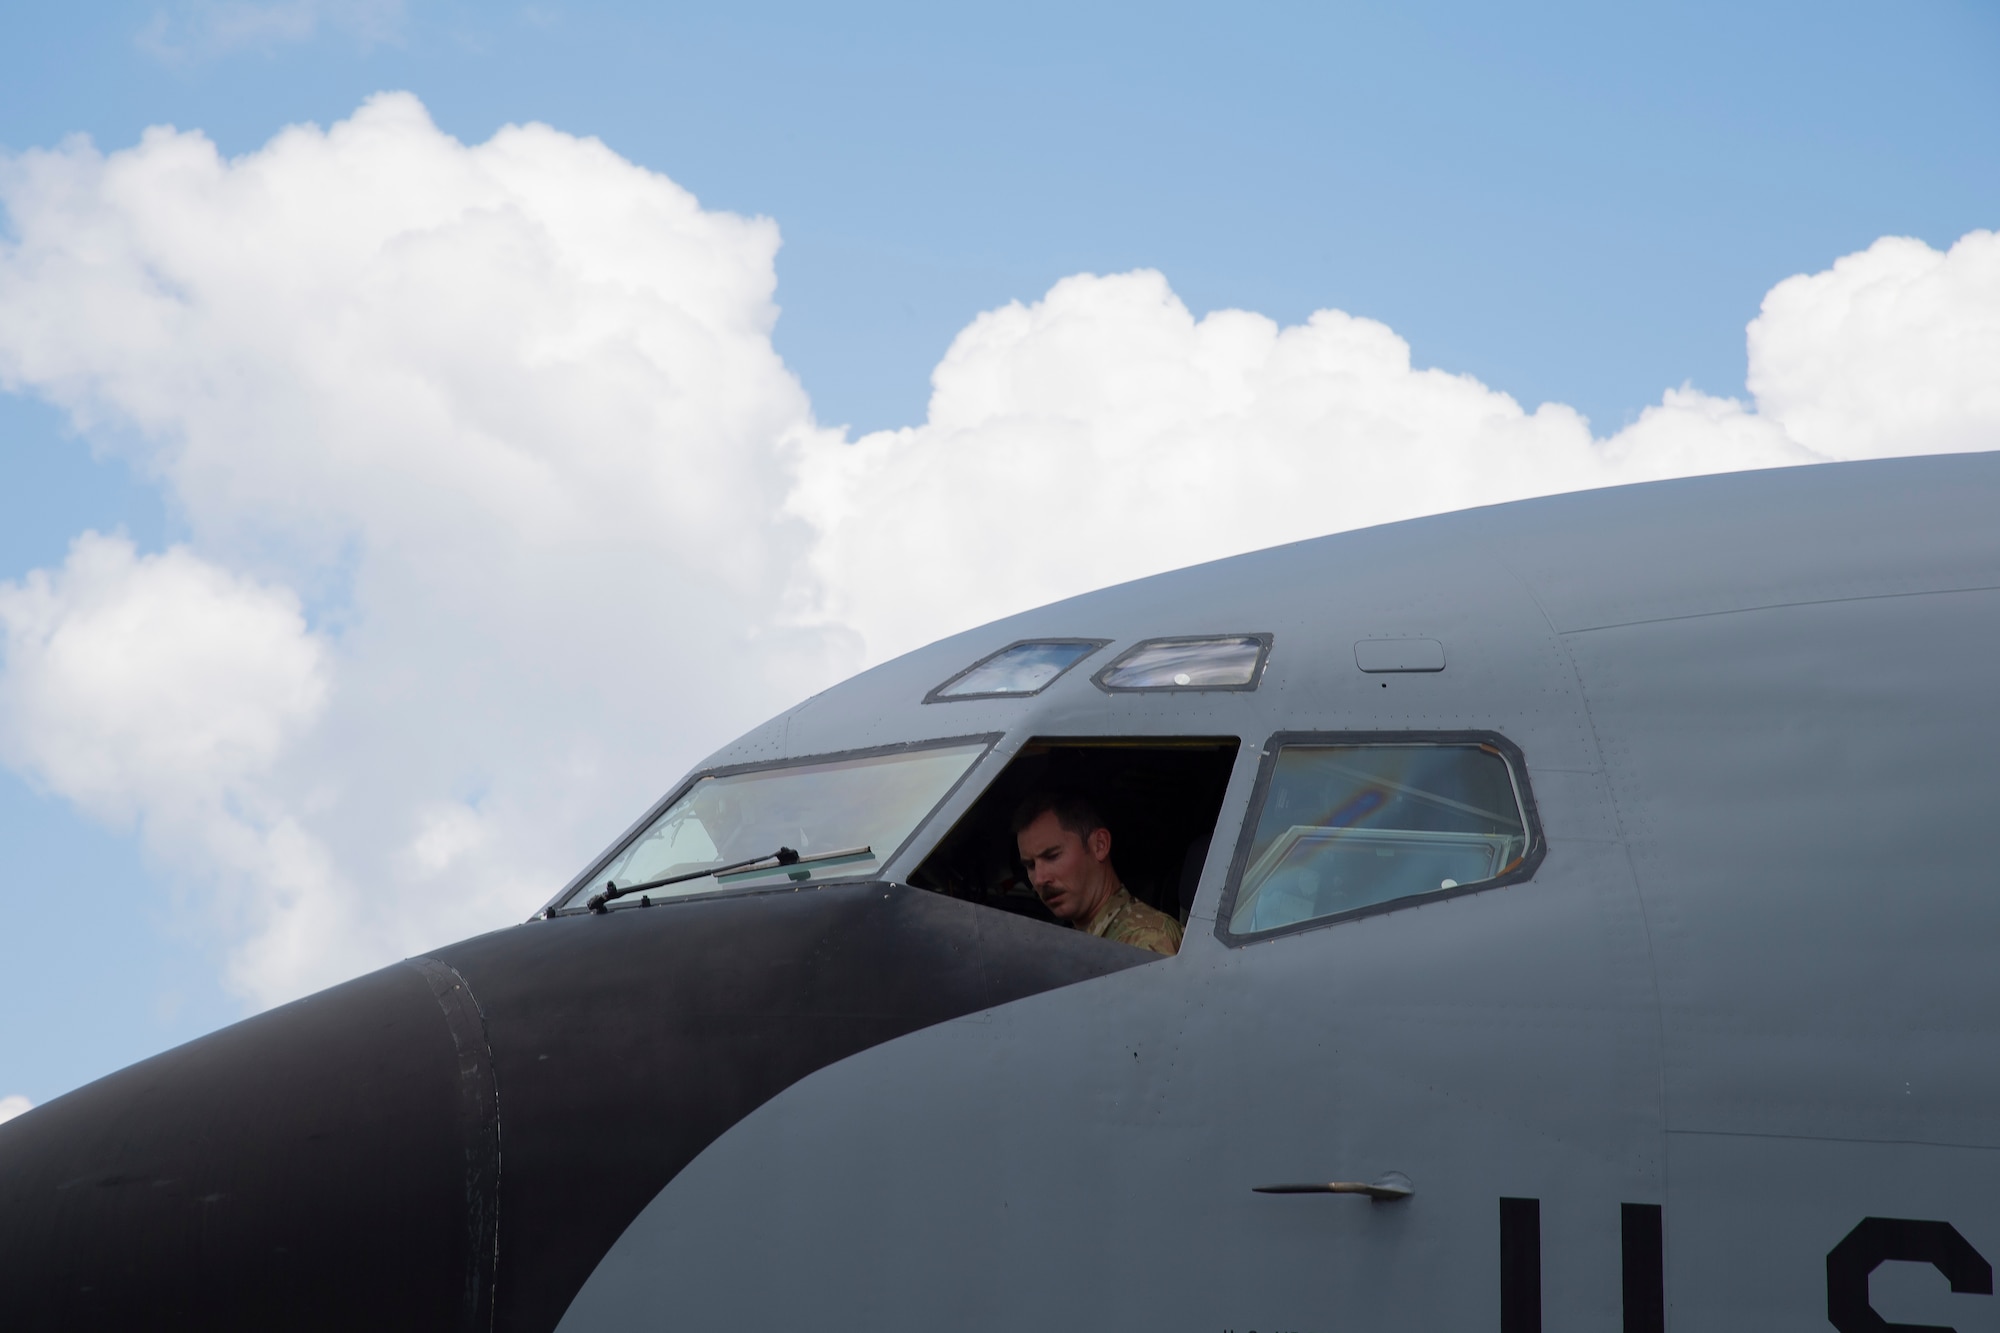 A U.S. Air Force Pilot sits in the cockpit of a KC-135 Stratotanker aircraft after arriving at MacDill Air Force Base, Florida, Sept. 8, 2021.